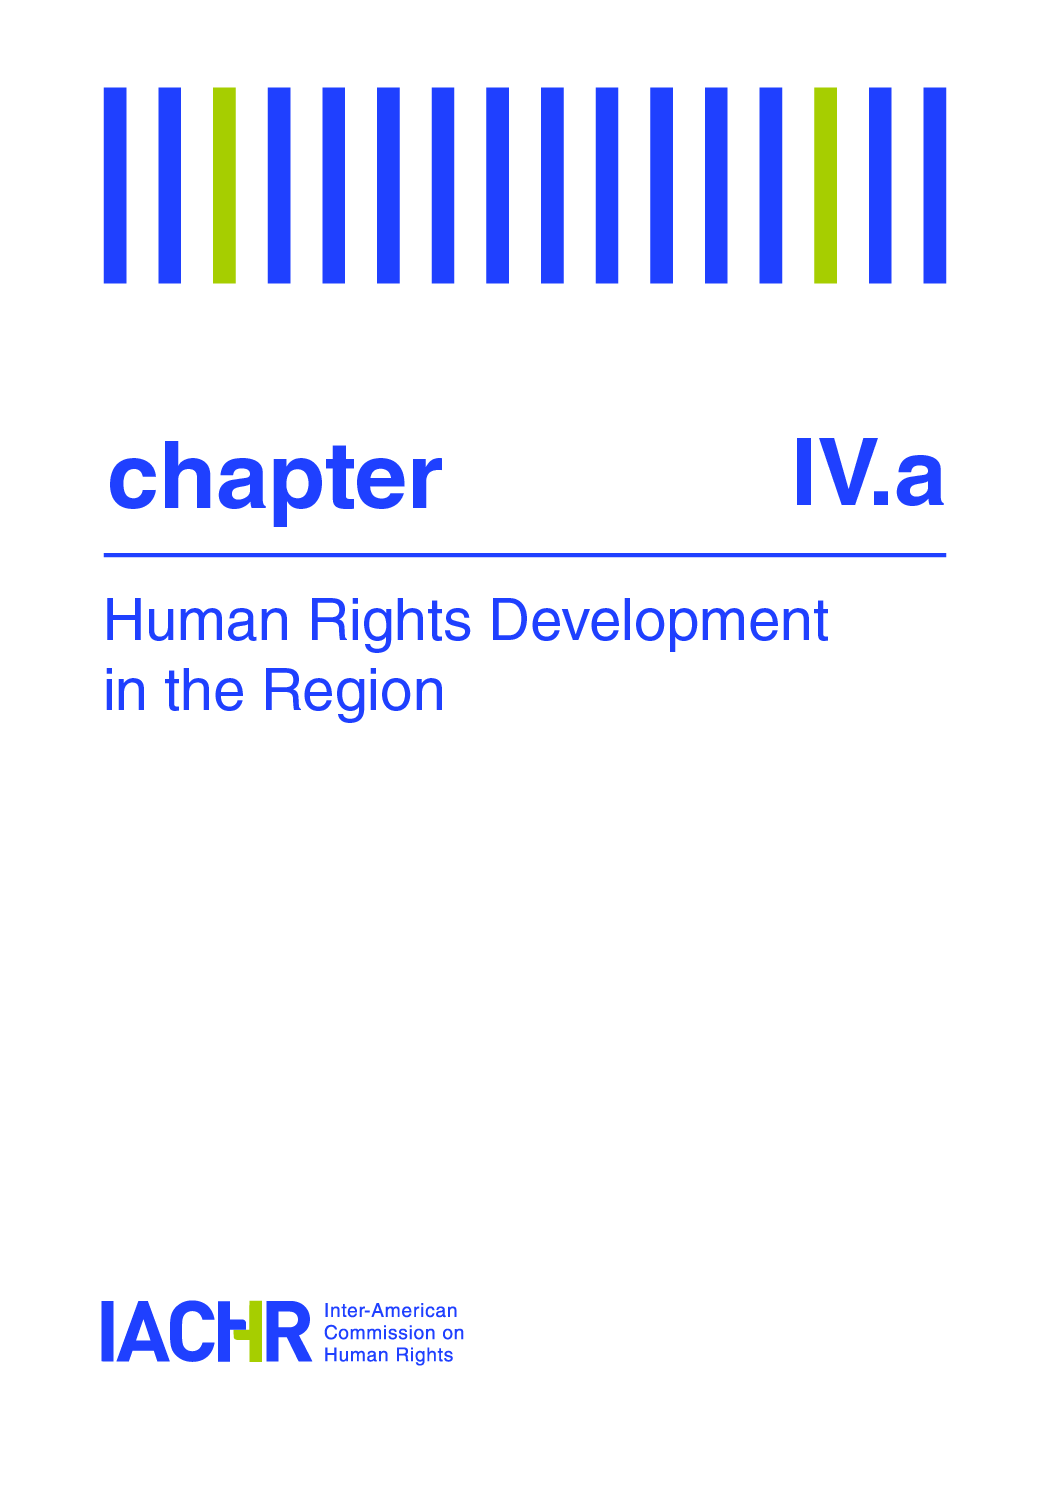 A. Overview of the Human Rights situation by country